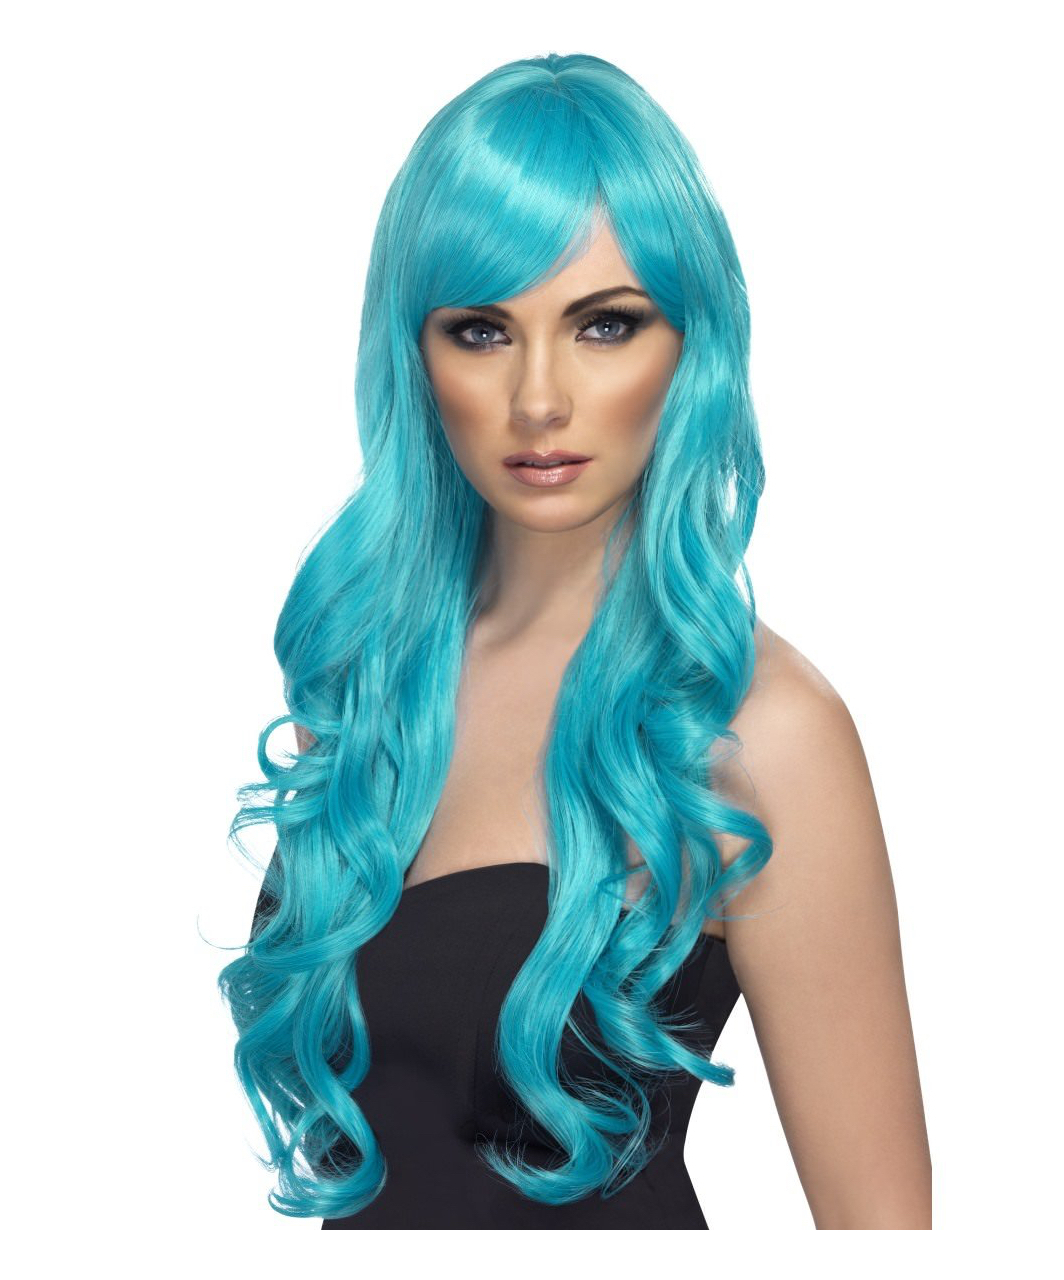 Fever Desire turquoise wig